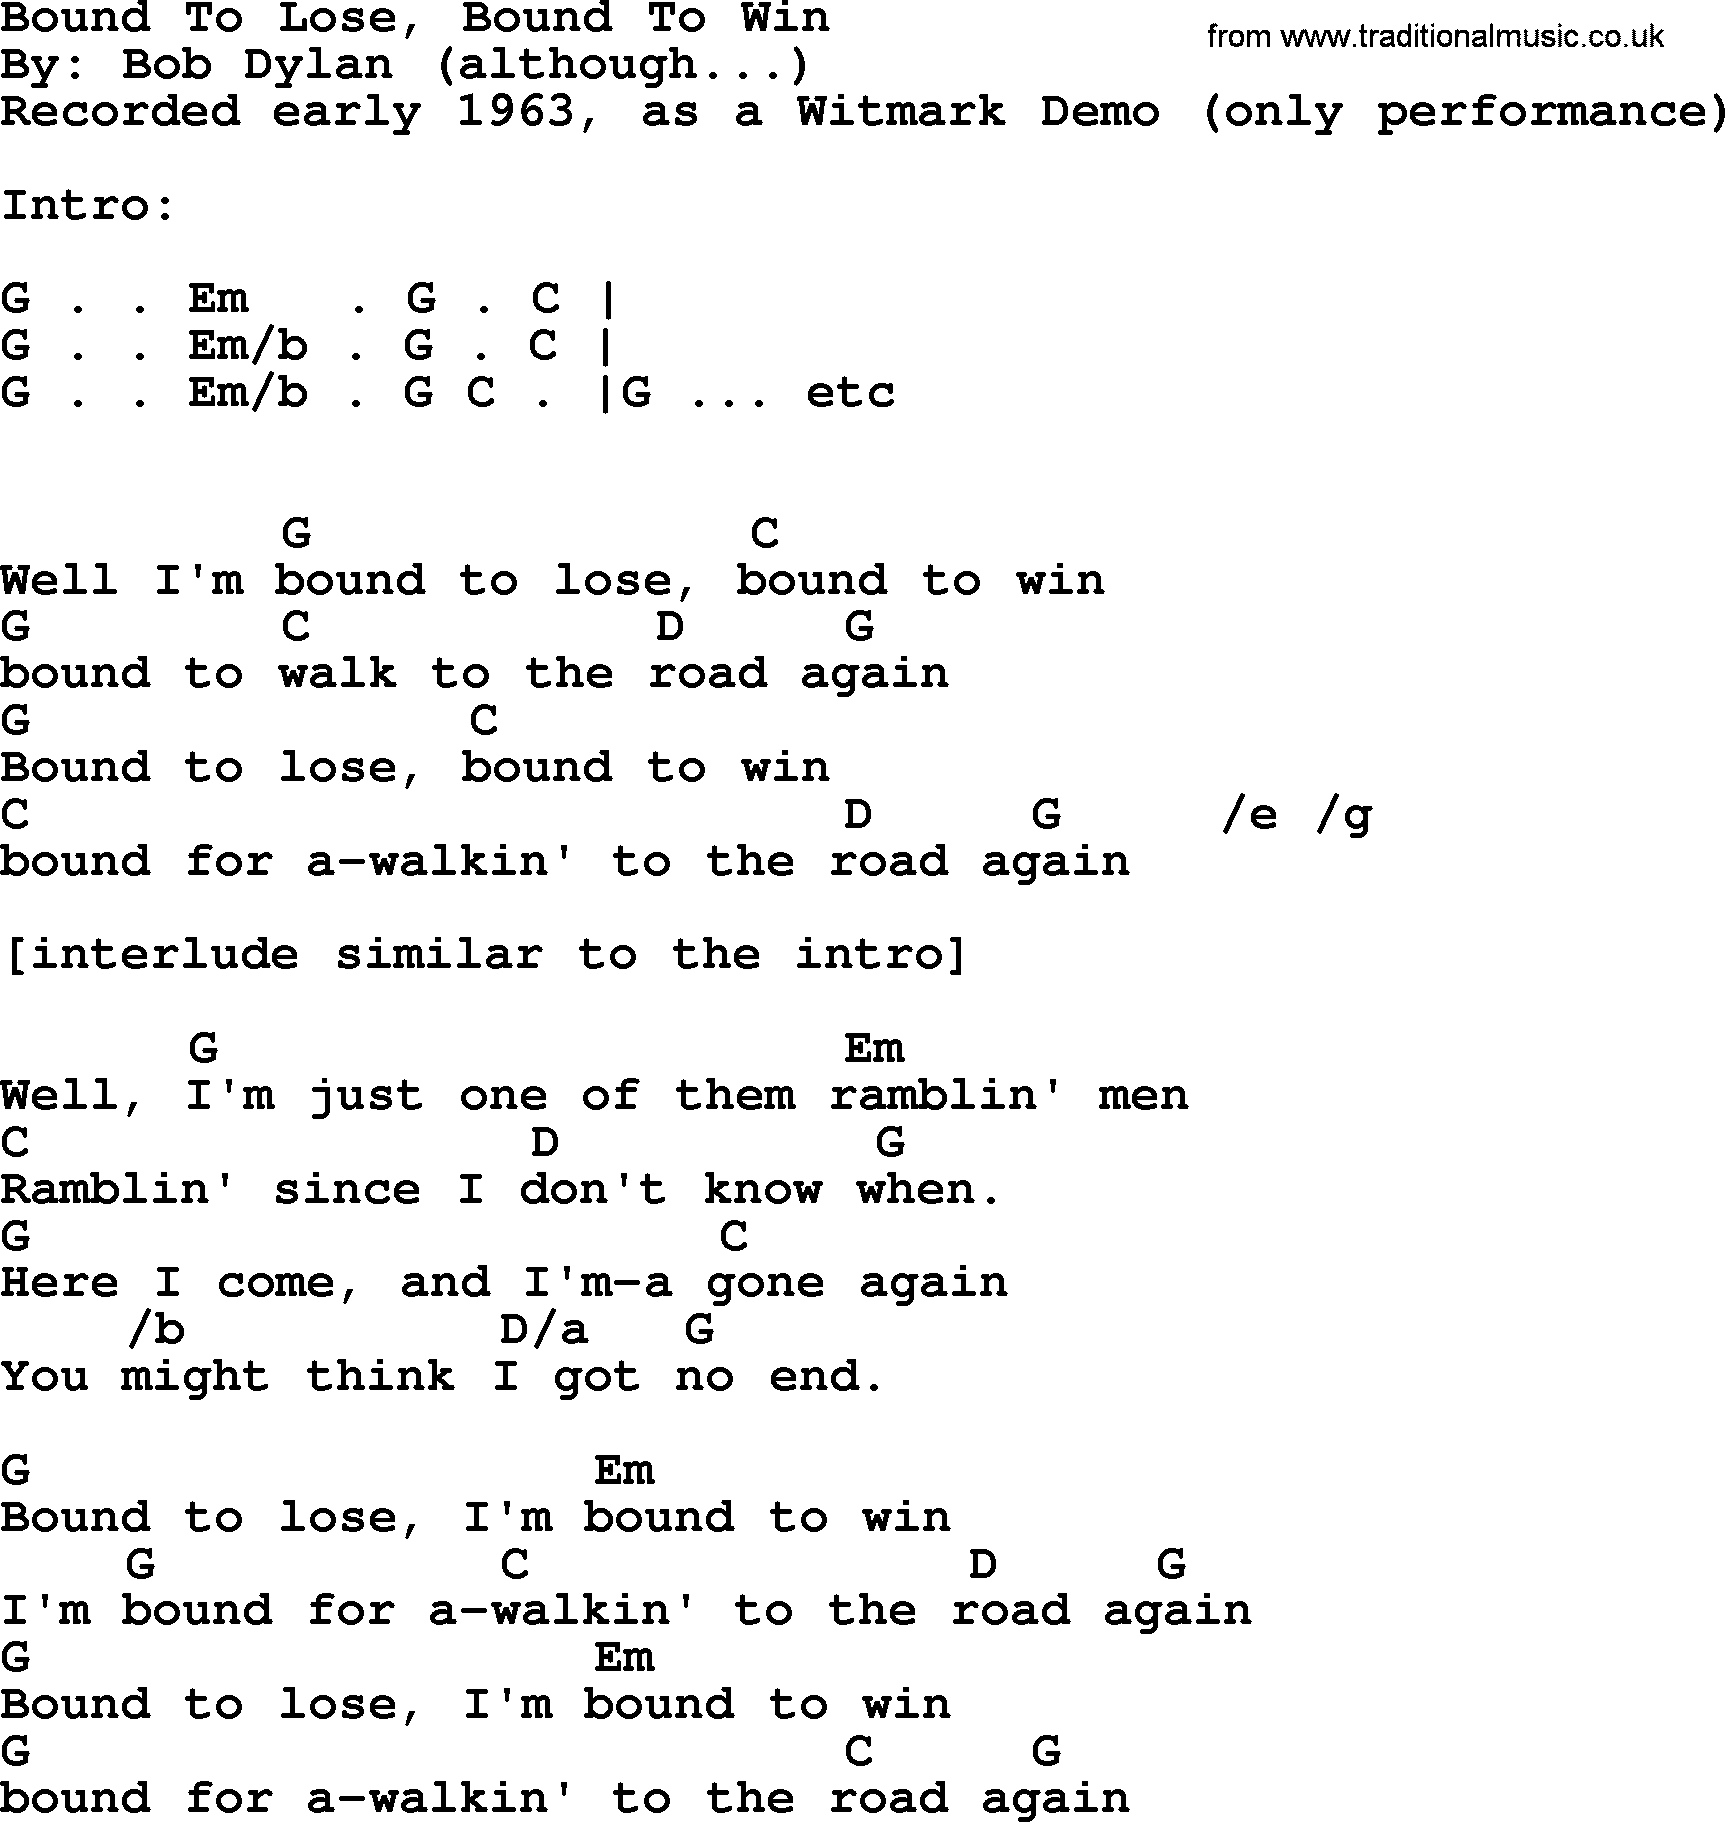 Bob Dylan song, lyrics with chords - Bound To Lose, Bound To Win